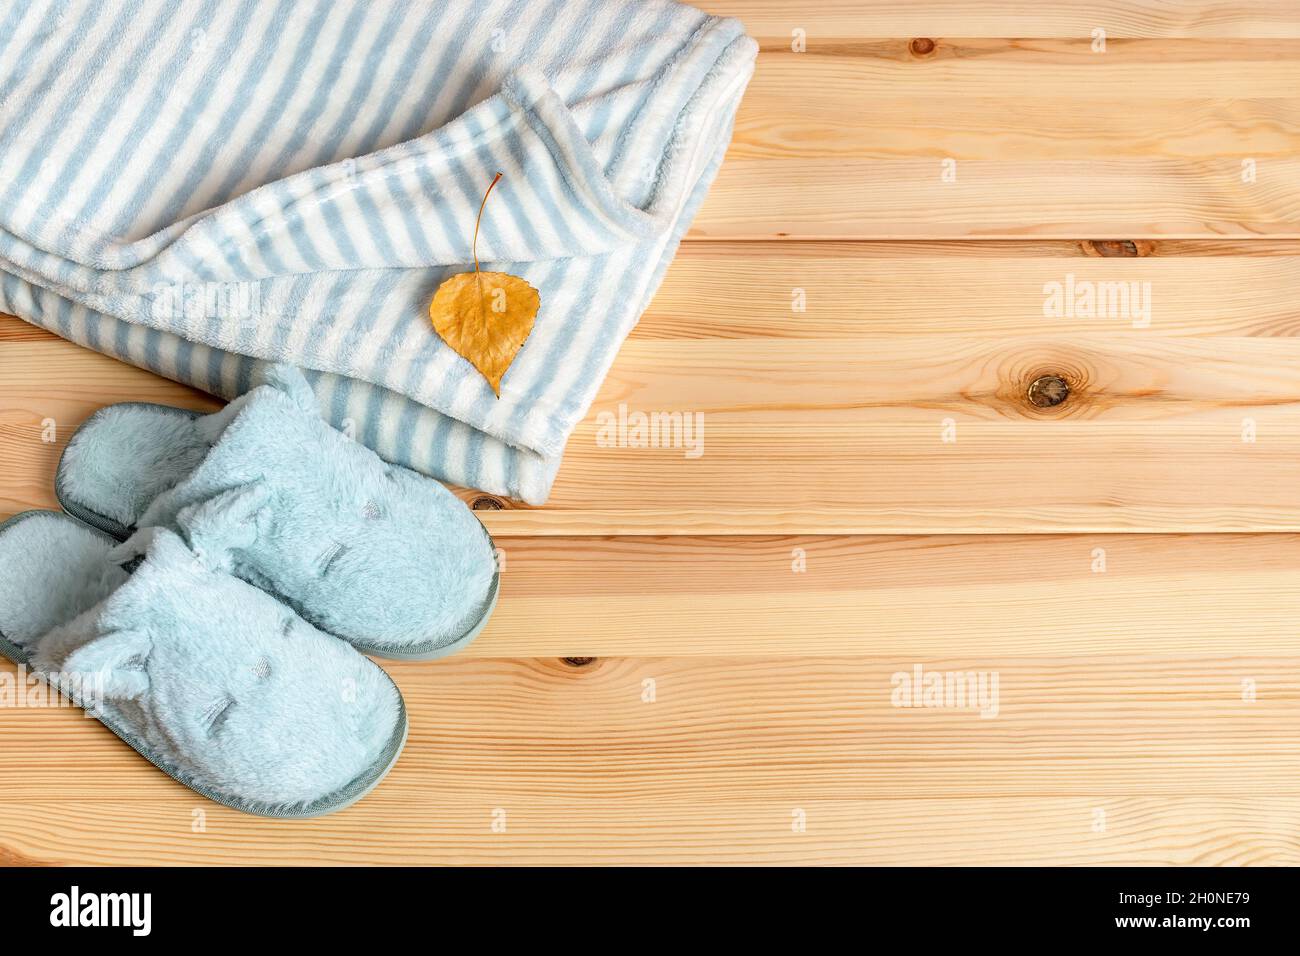 Yellow autumn leaf over striped fuzzy blanket and funny cat face blue slippers over natural wood surface. Warm fleece bedding and winter home shoes. Stock Photo